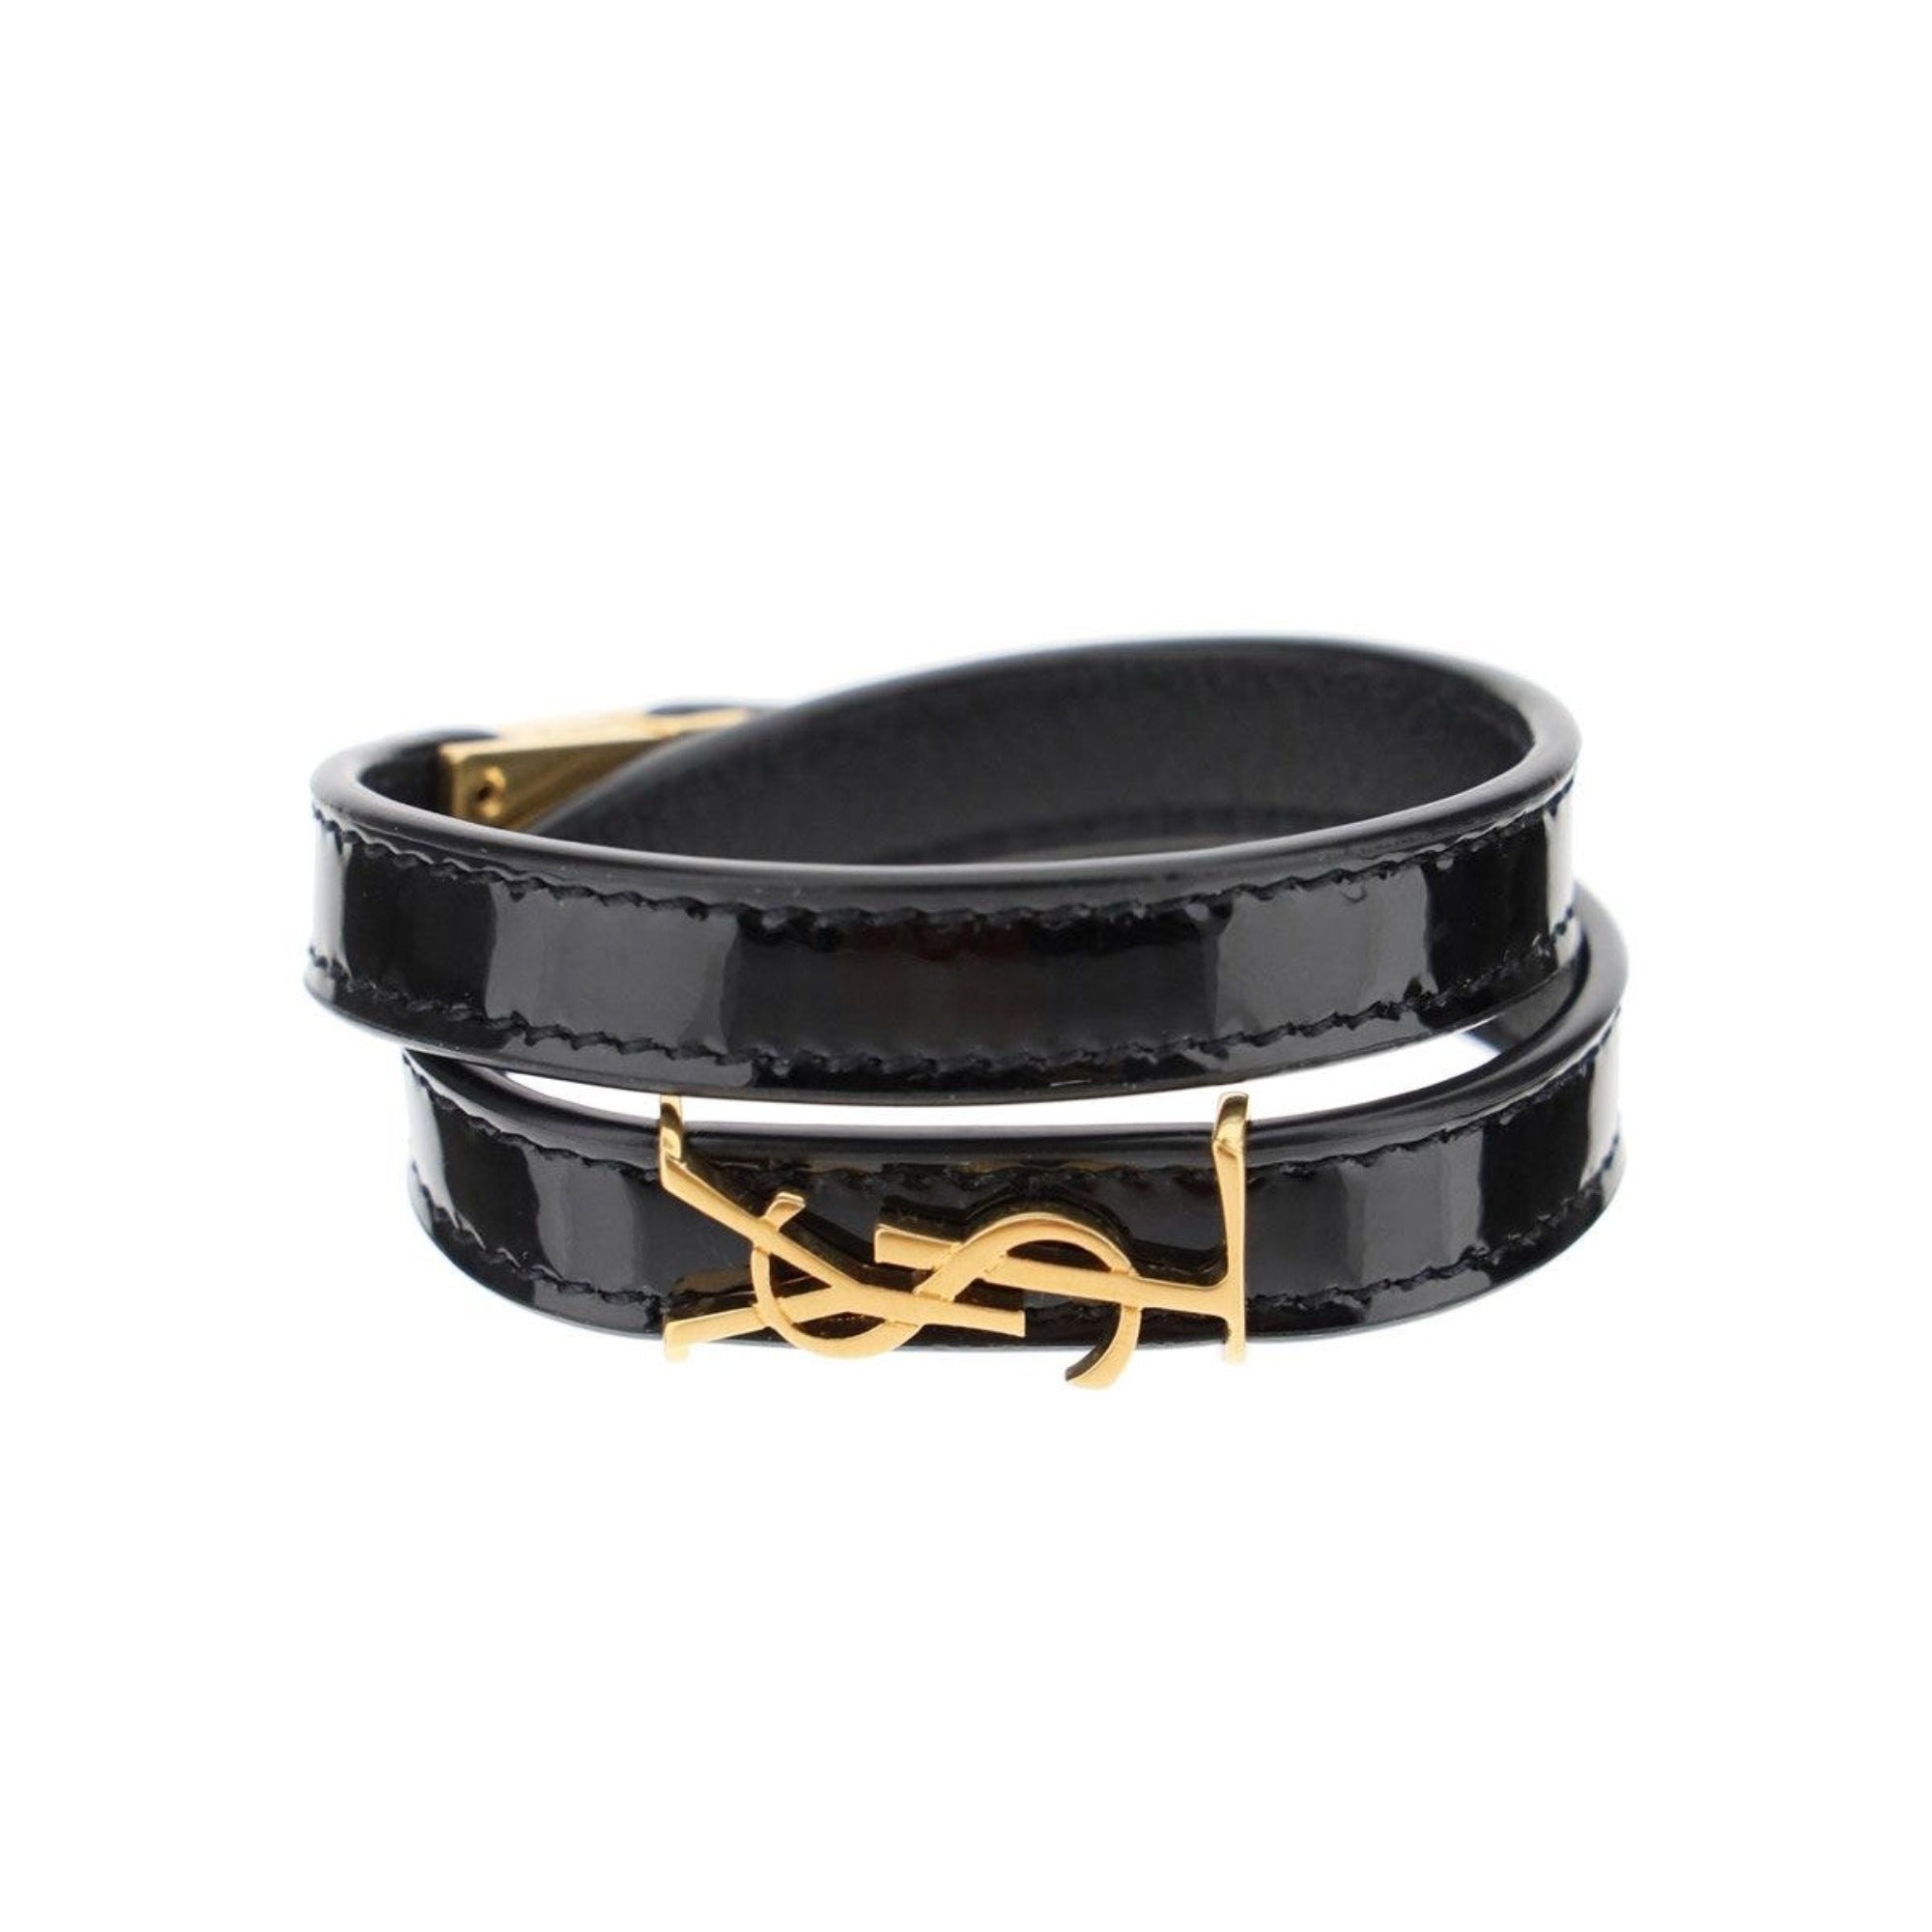 Saint Laurent Opyum Black Patent Leather Double Wrap Bracelet 536073 at_Queen_Bee_of_Beverly_Hills